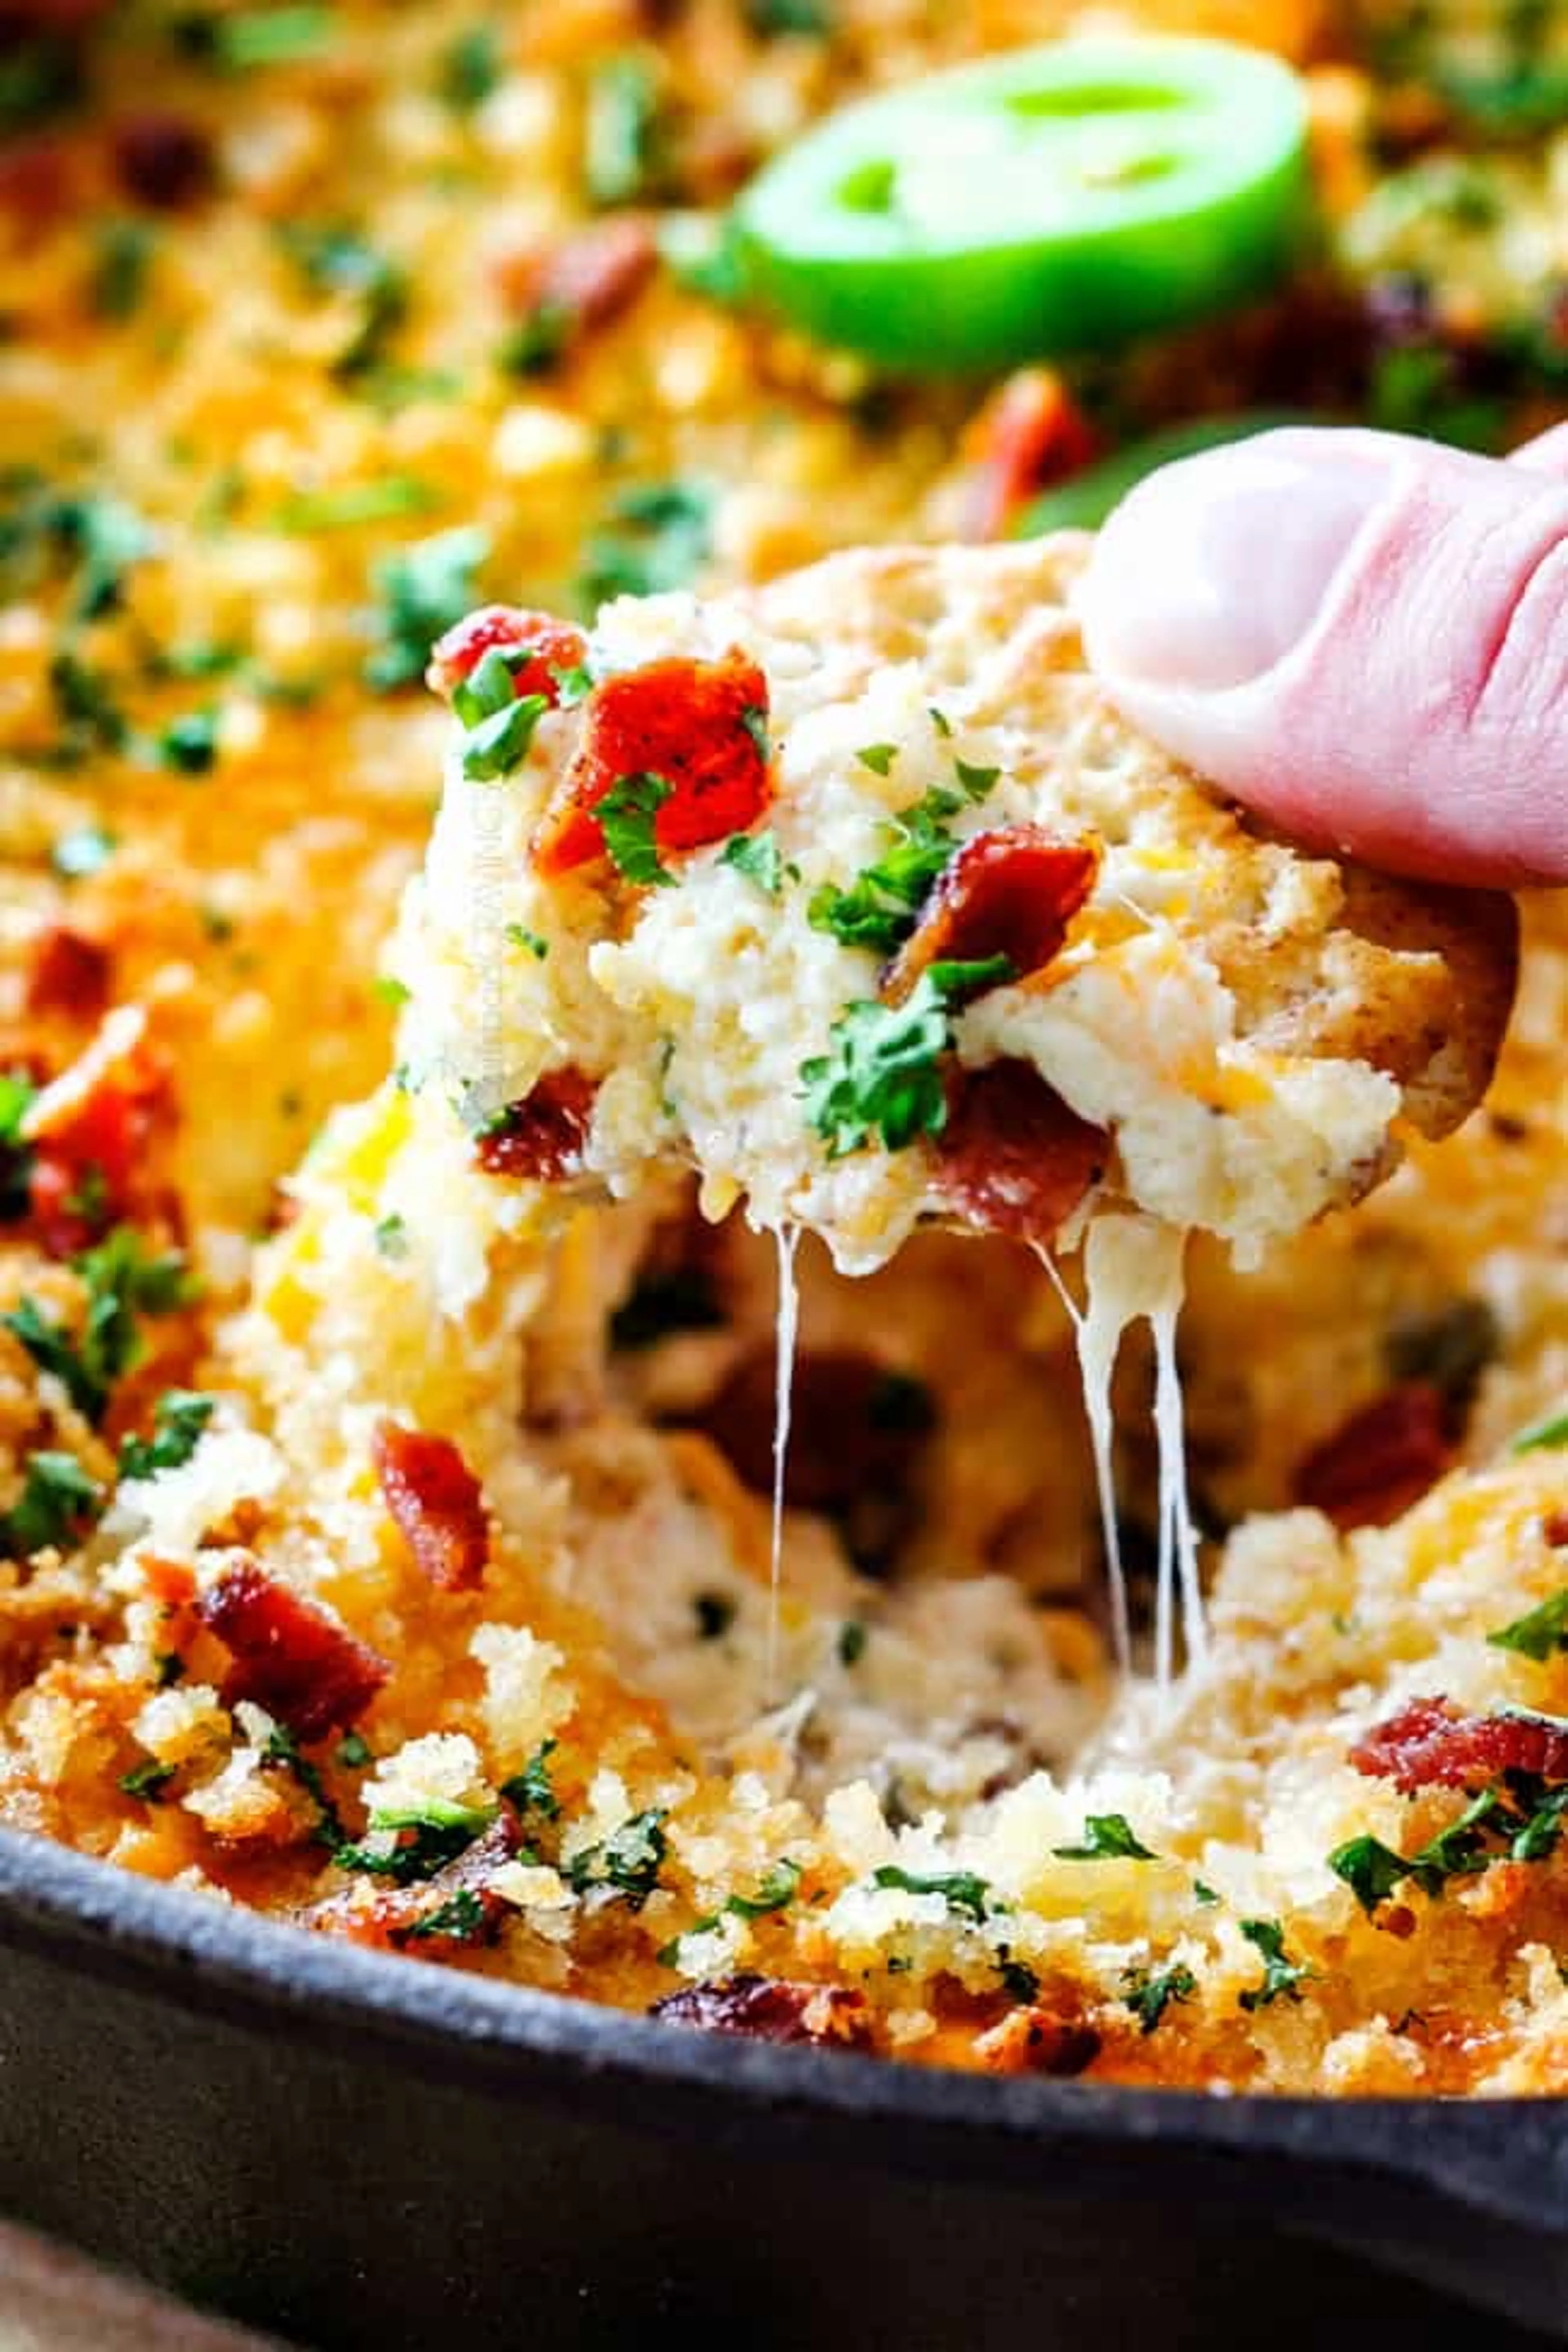 Jalapeno Popper Dip with Bacon (Video)